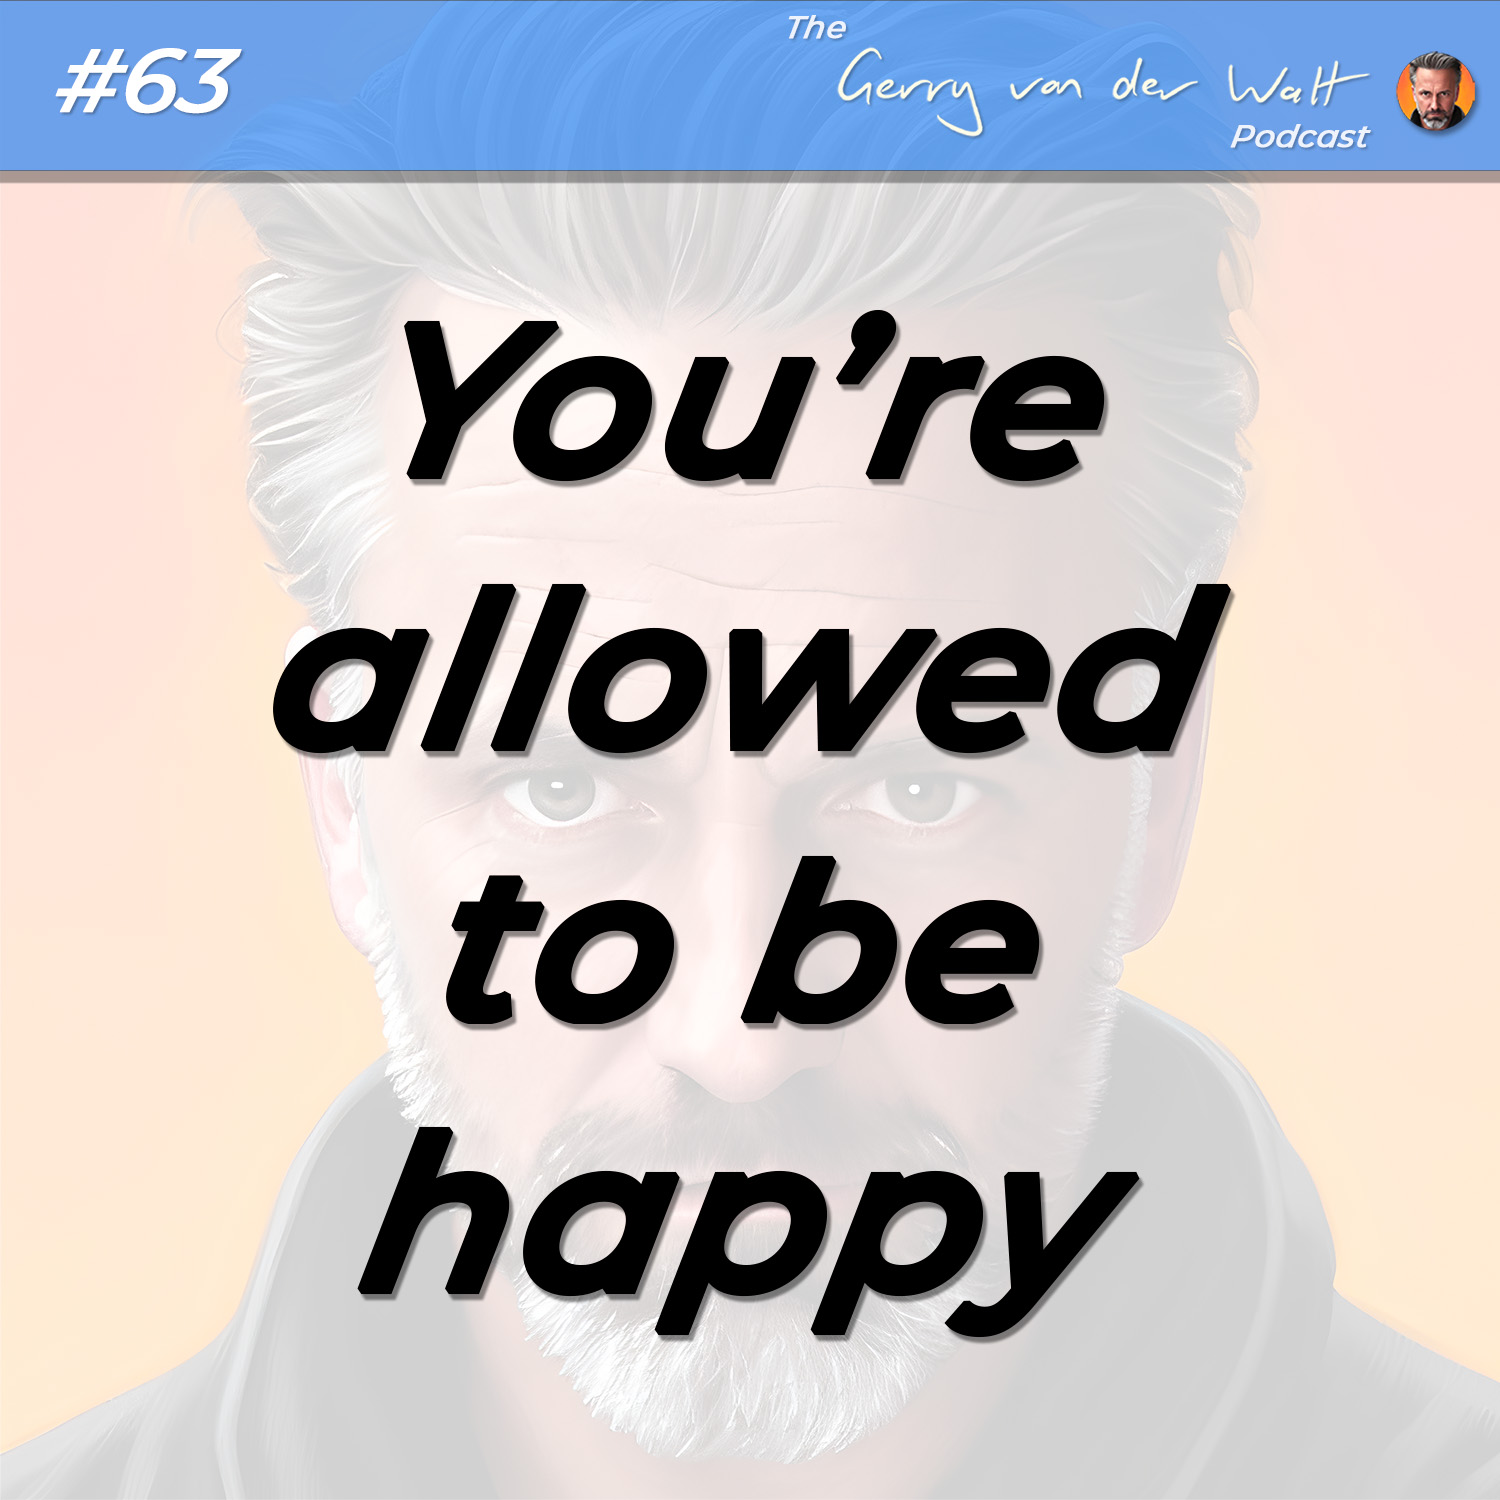 #63 - You're allowed to be happy